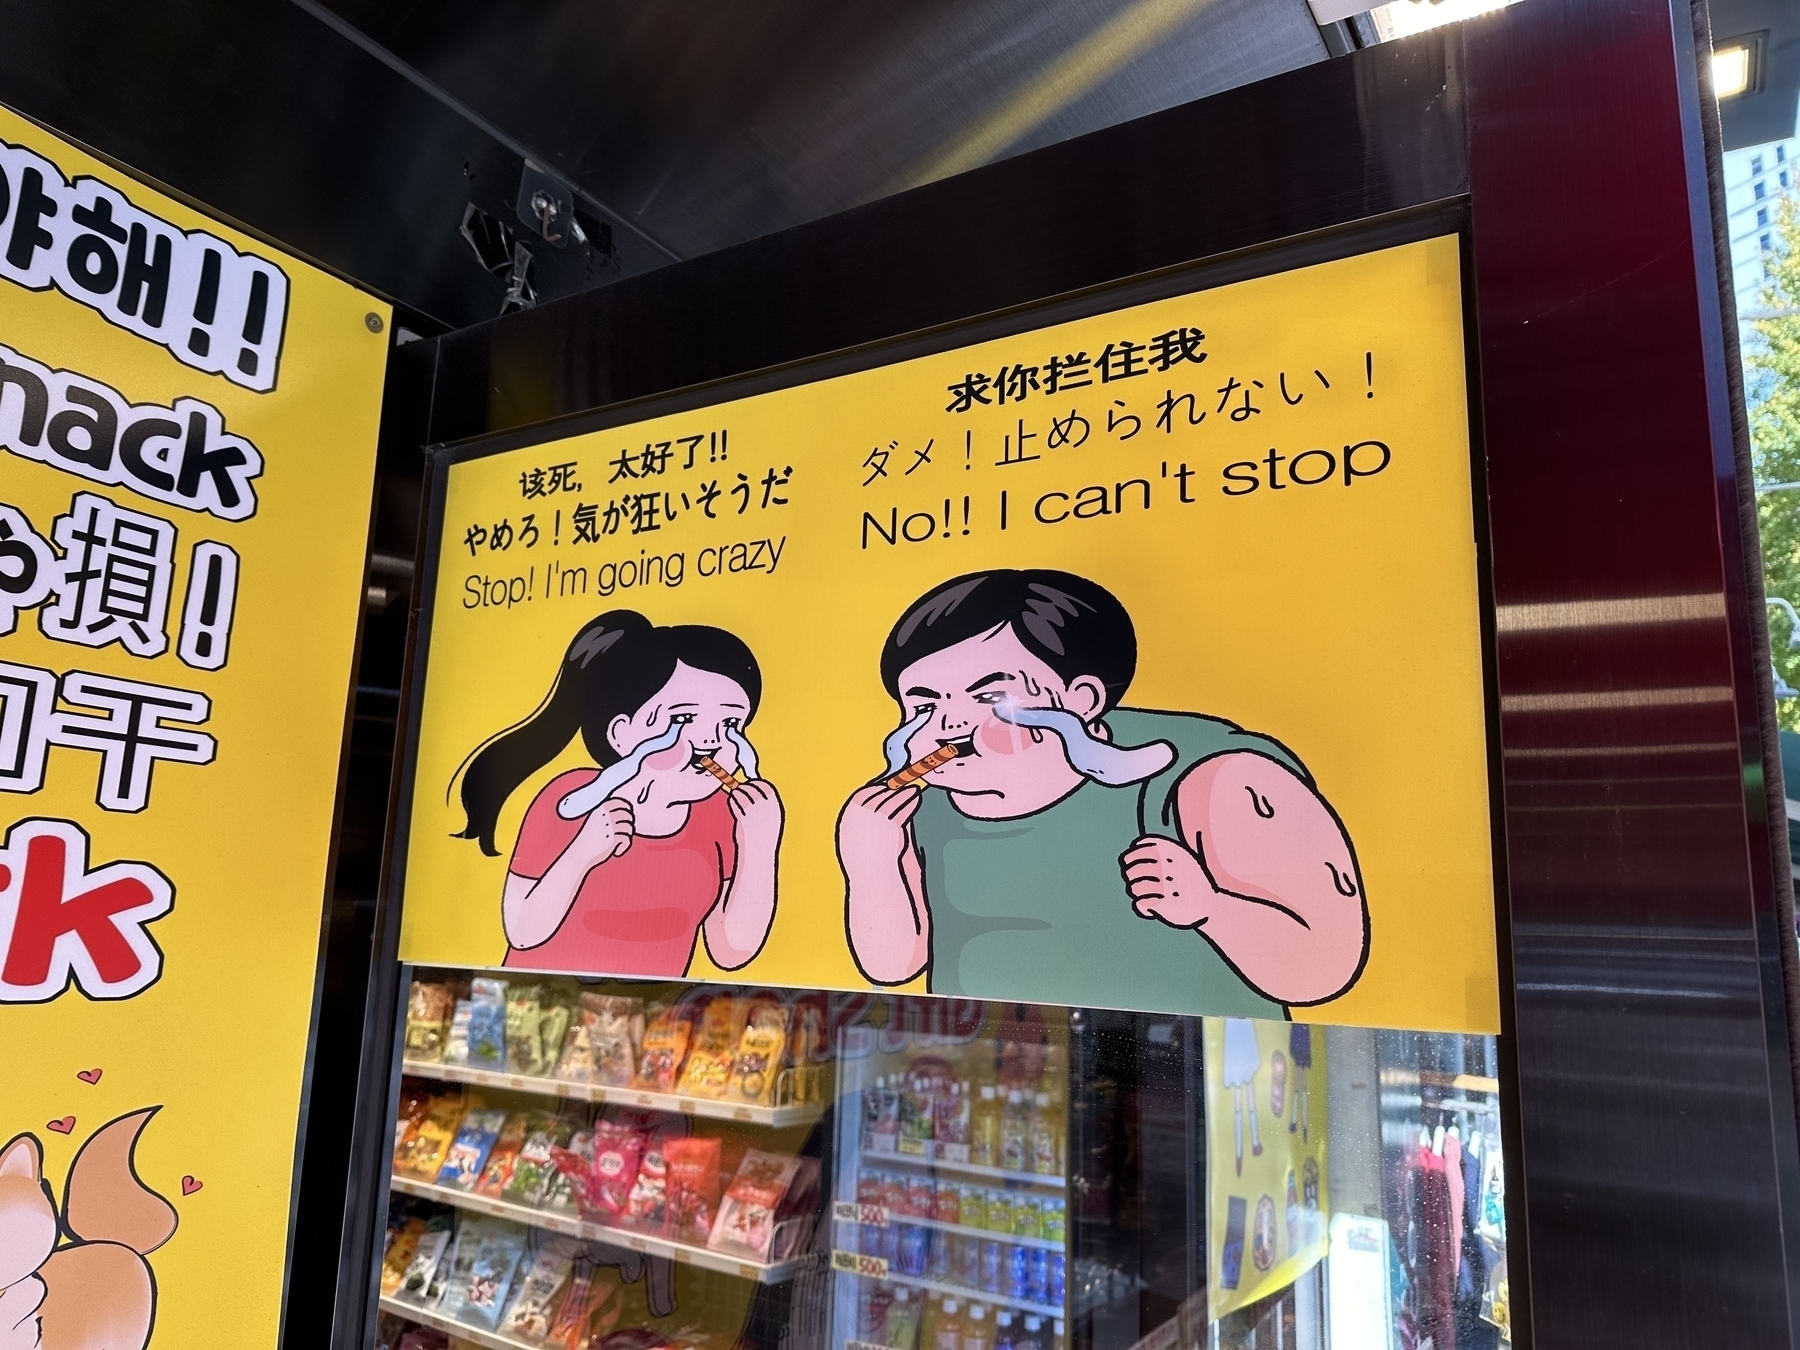 Funny sign at a snack store.